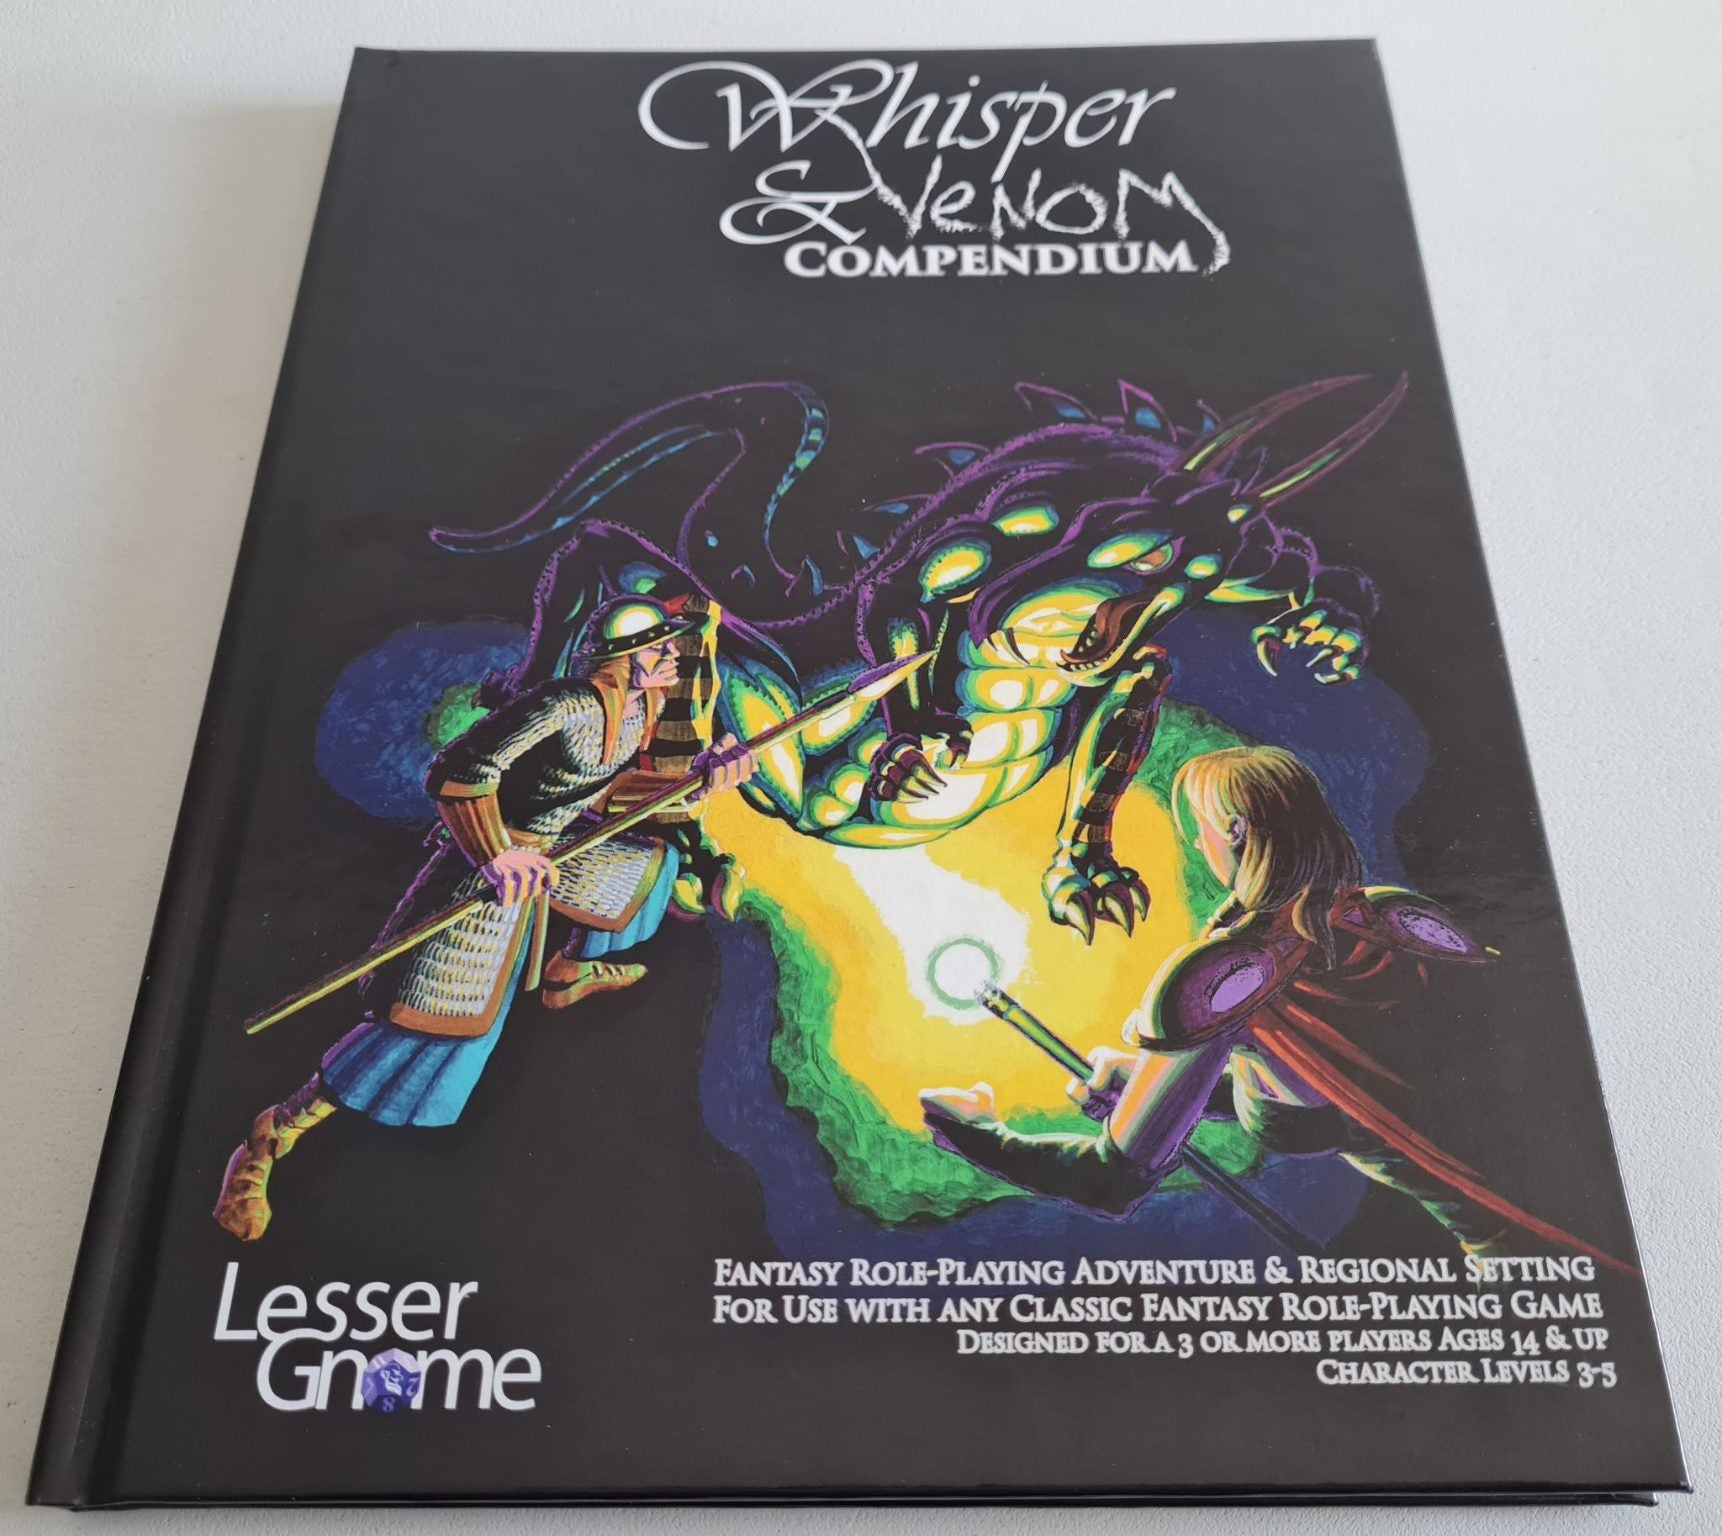 Whisper and Venom Compendium - Role Playing Adventure (D&D Compatible)